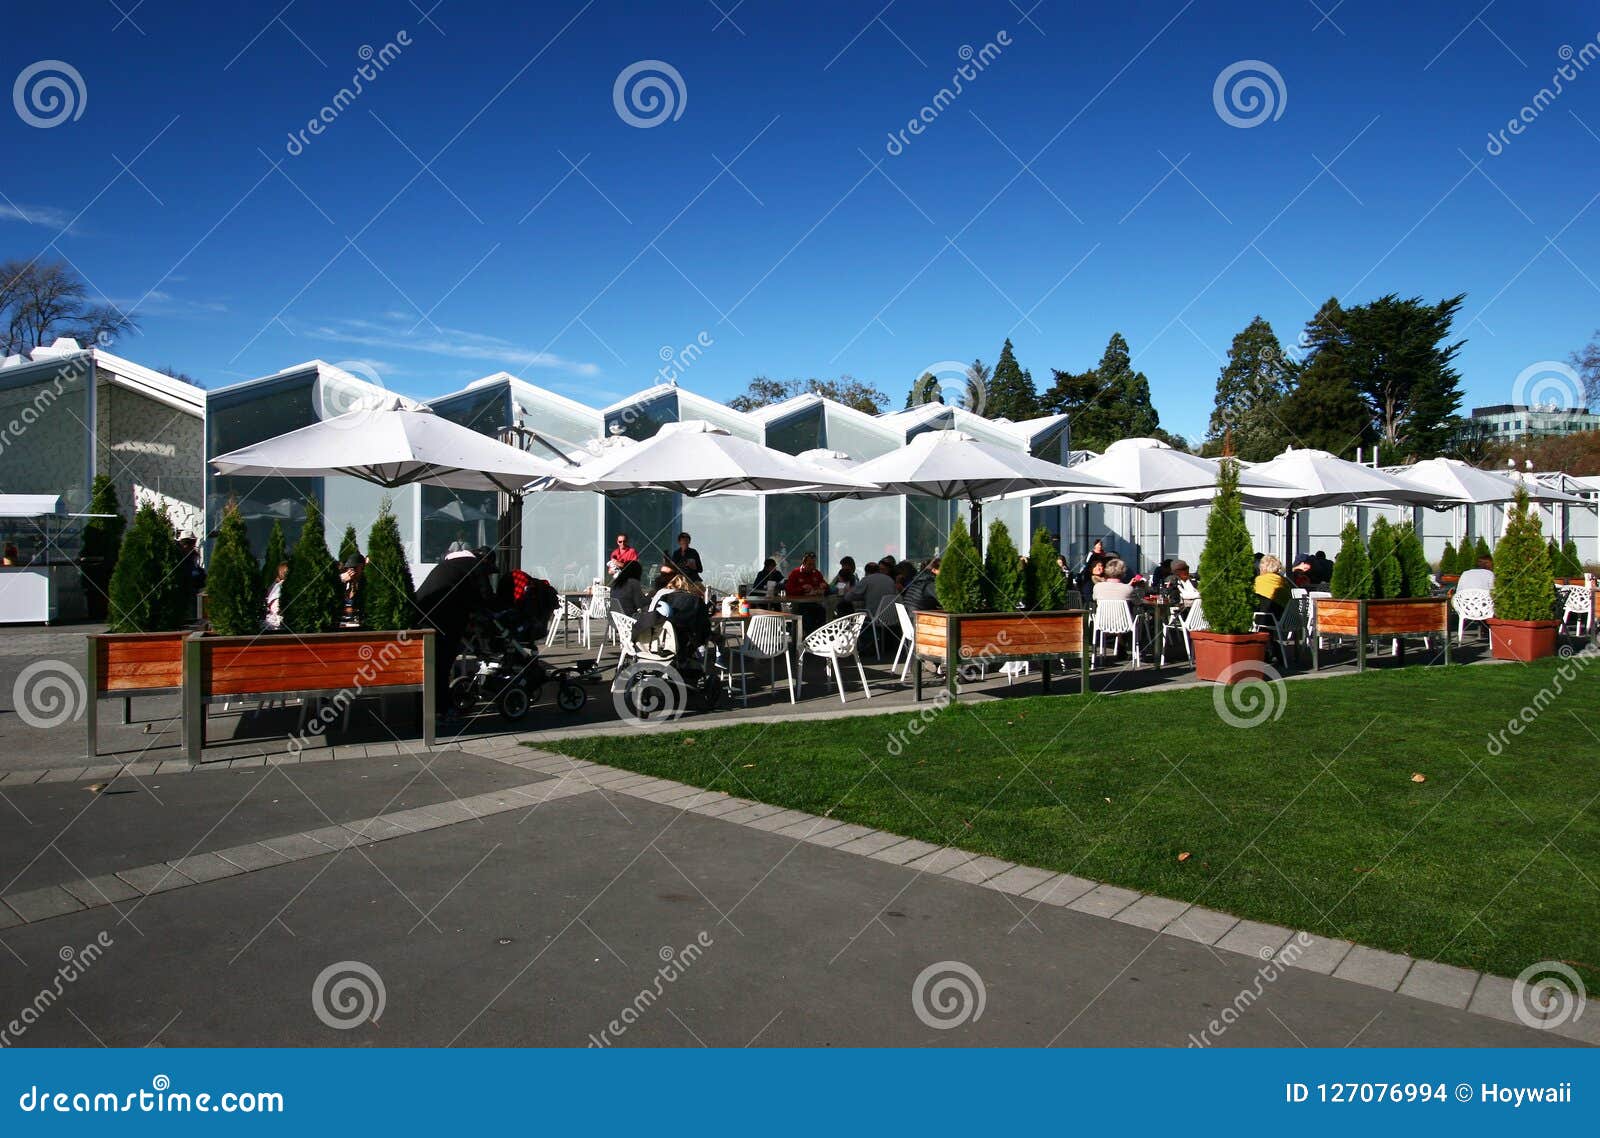 Outdoor Cafe Ilex Seating Area With People At Christchurch Botanic